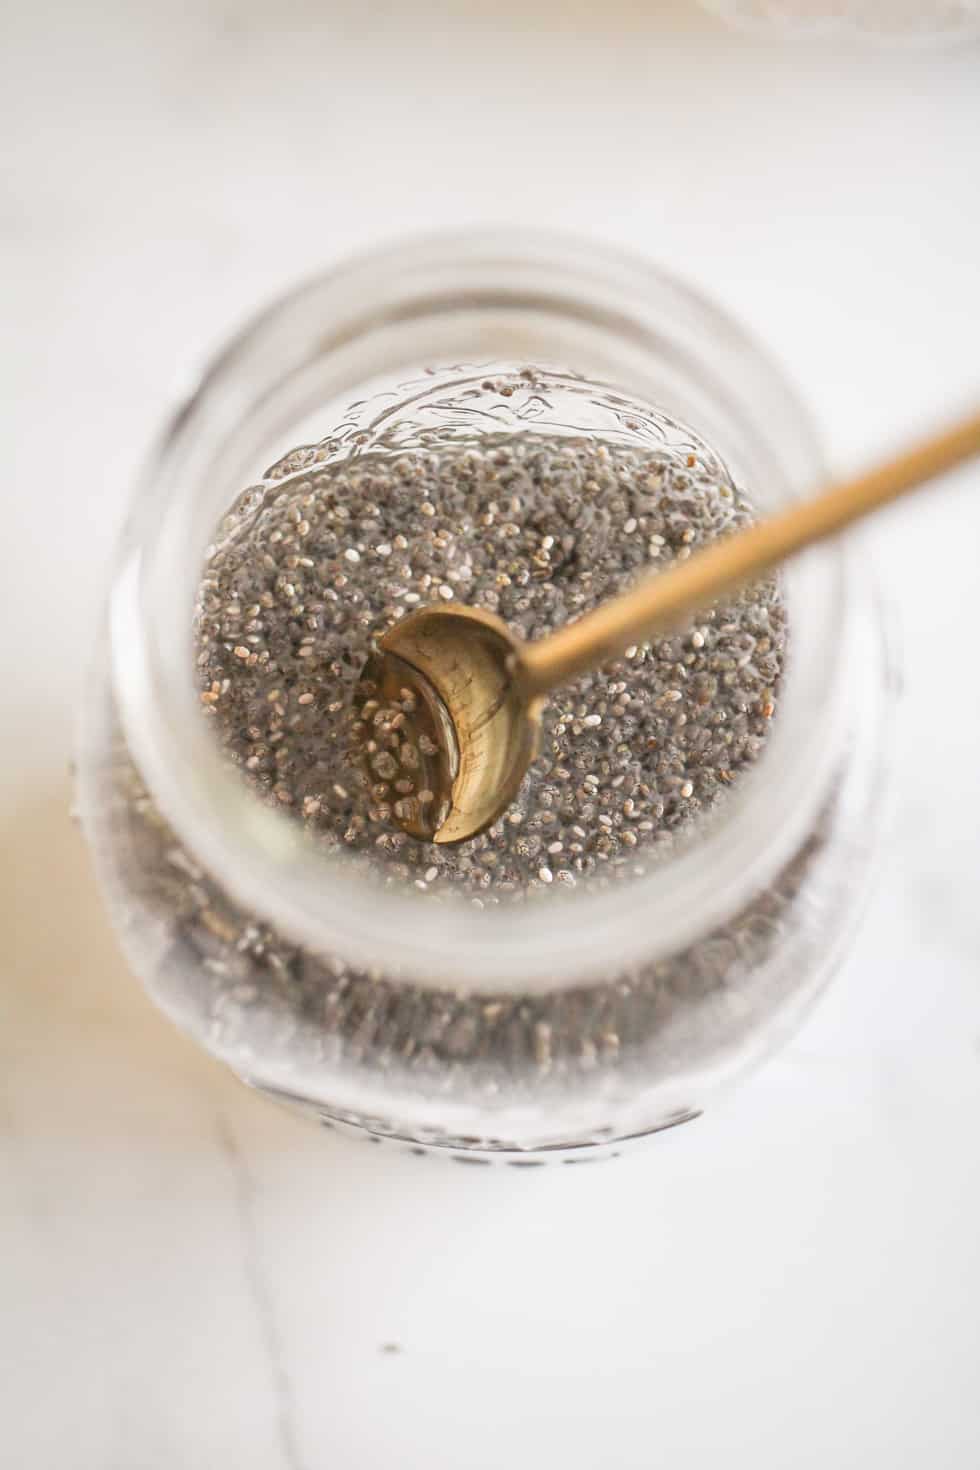 Chia gel or chia water in a glass jar with gold stirring spoon.